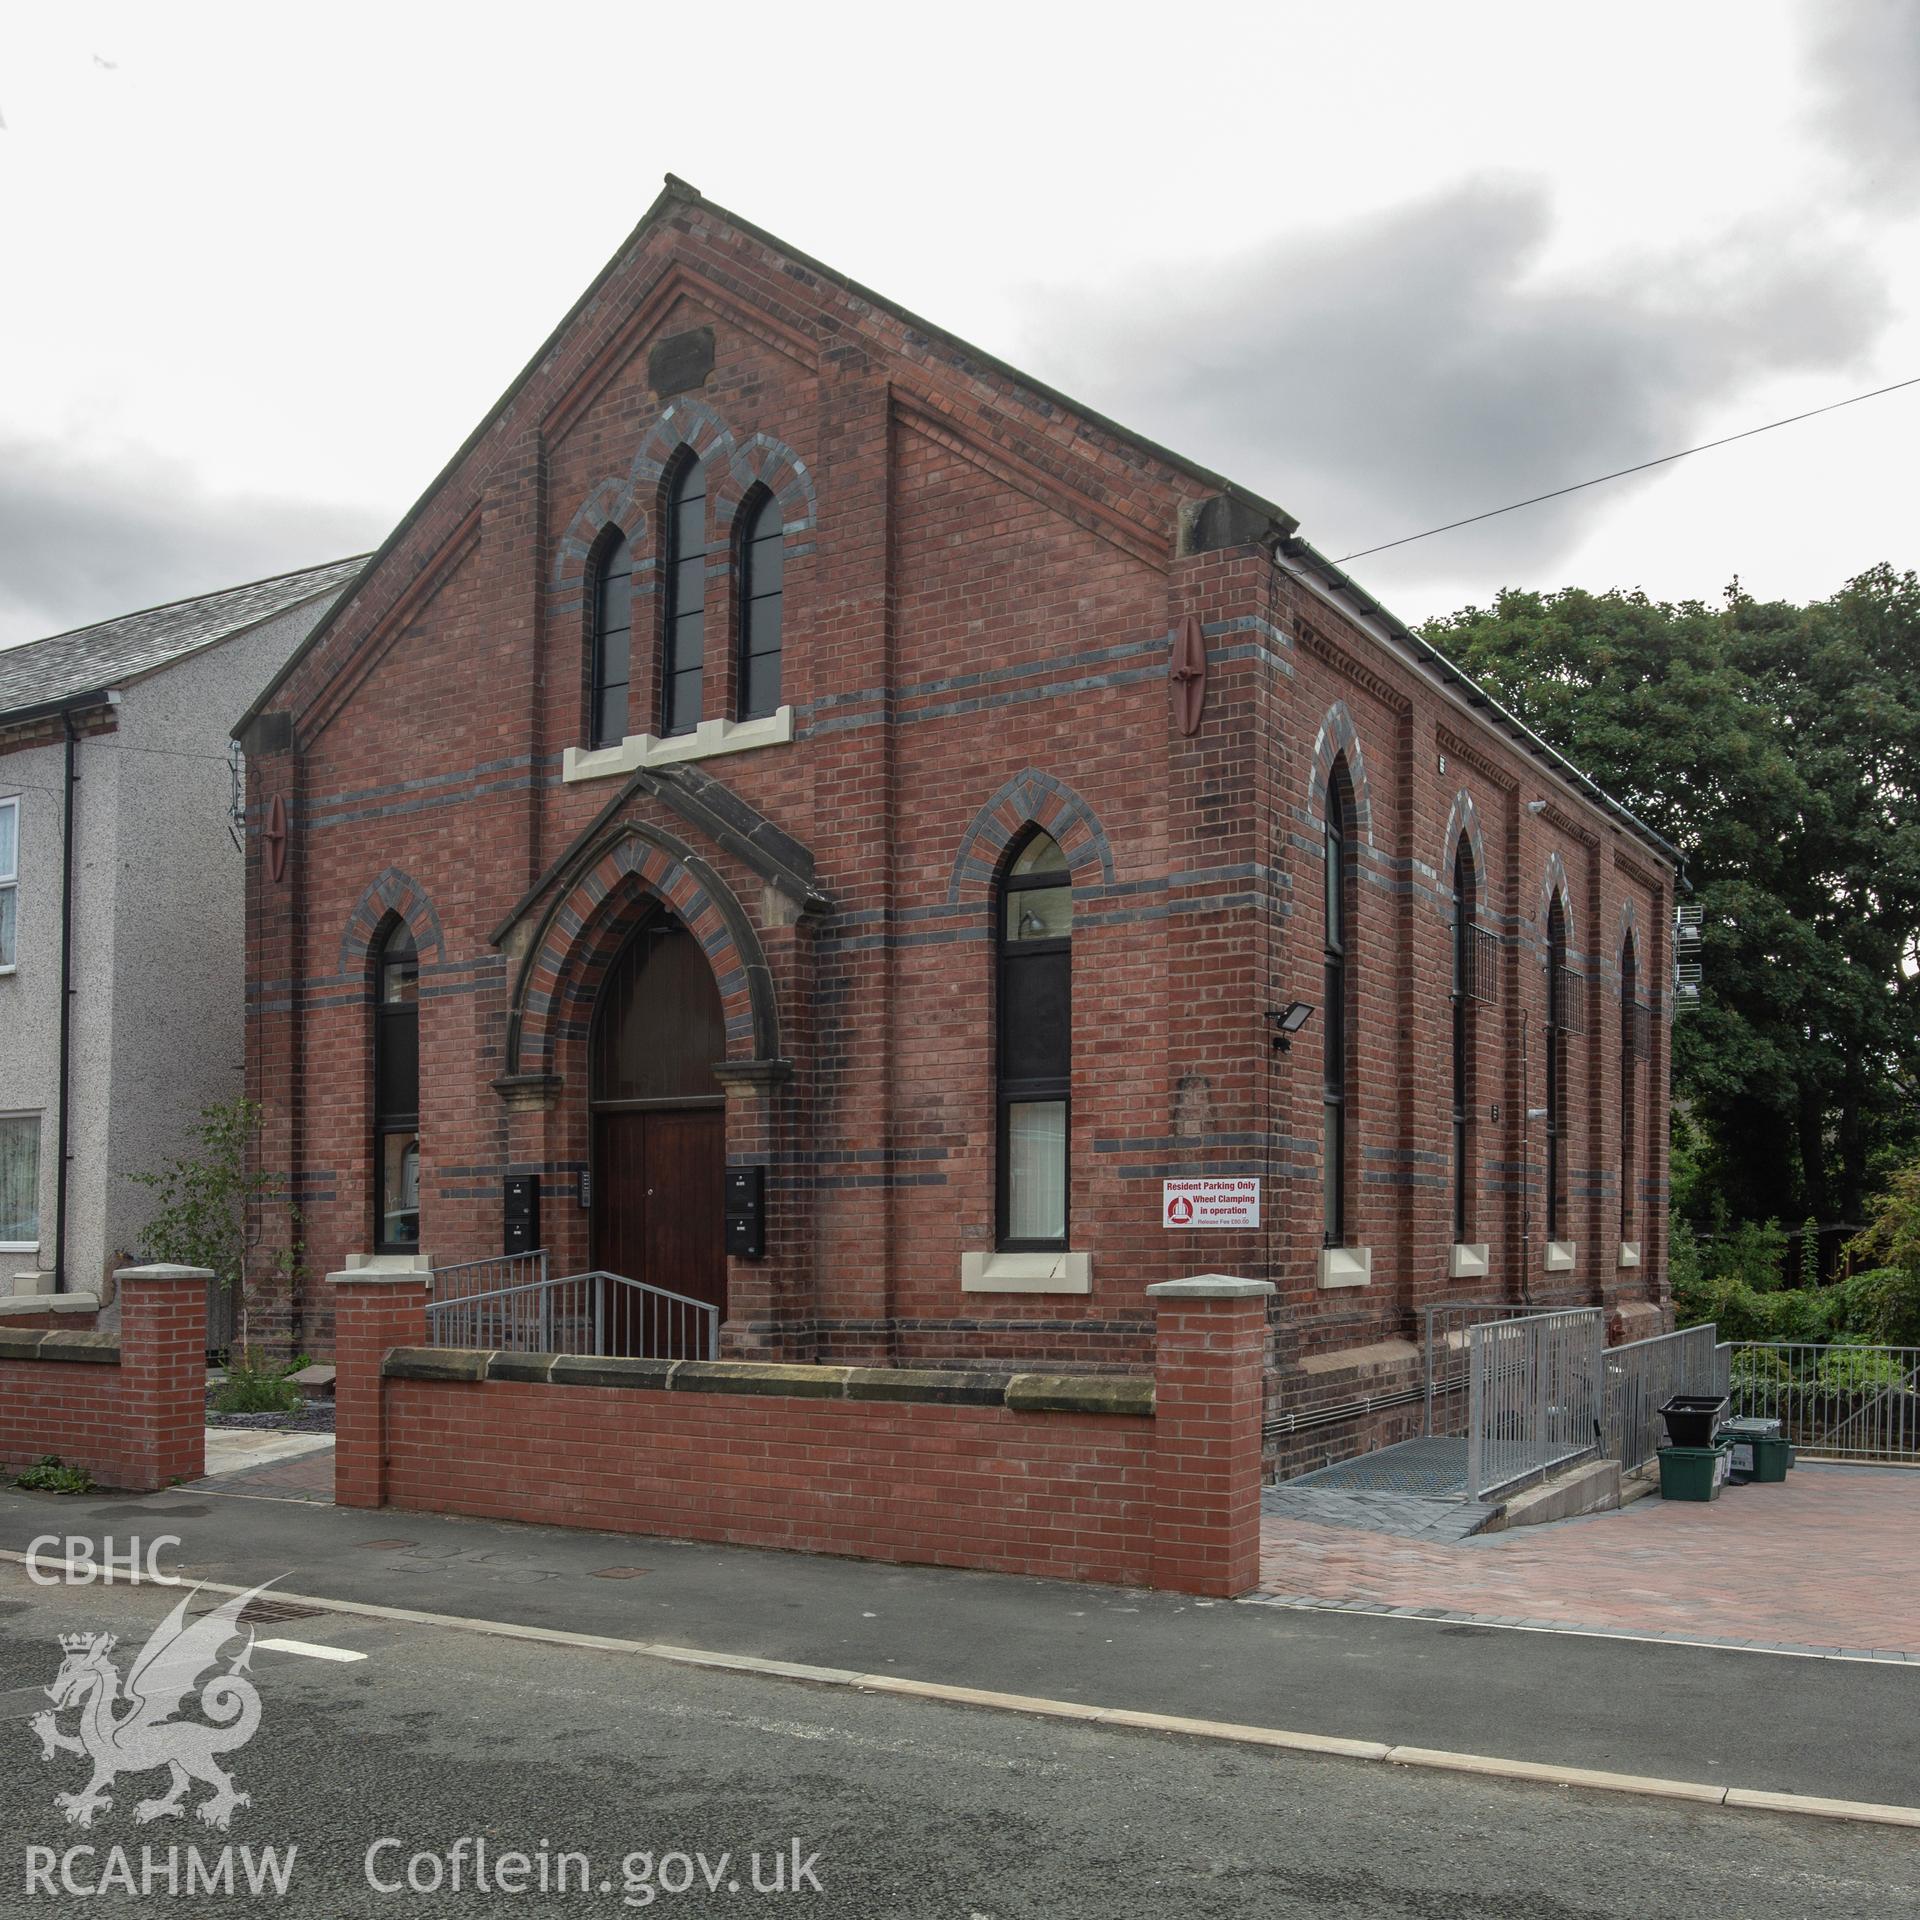 Colour photograph showing front elevation, side elevation and entrance of Talbot Road Methodist chapel, Wrexham. Photographed by Richard Barrett on 15th September 2018.